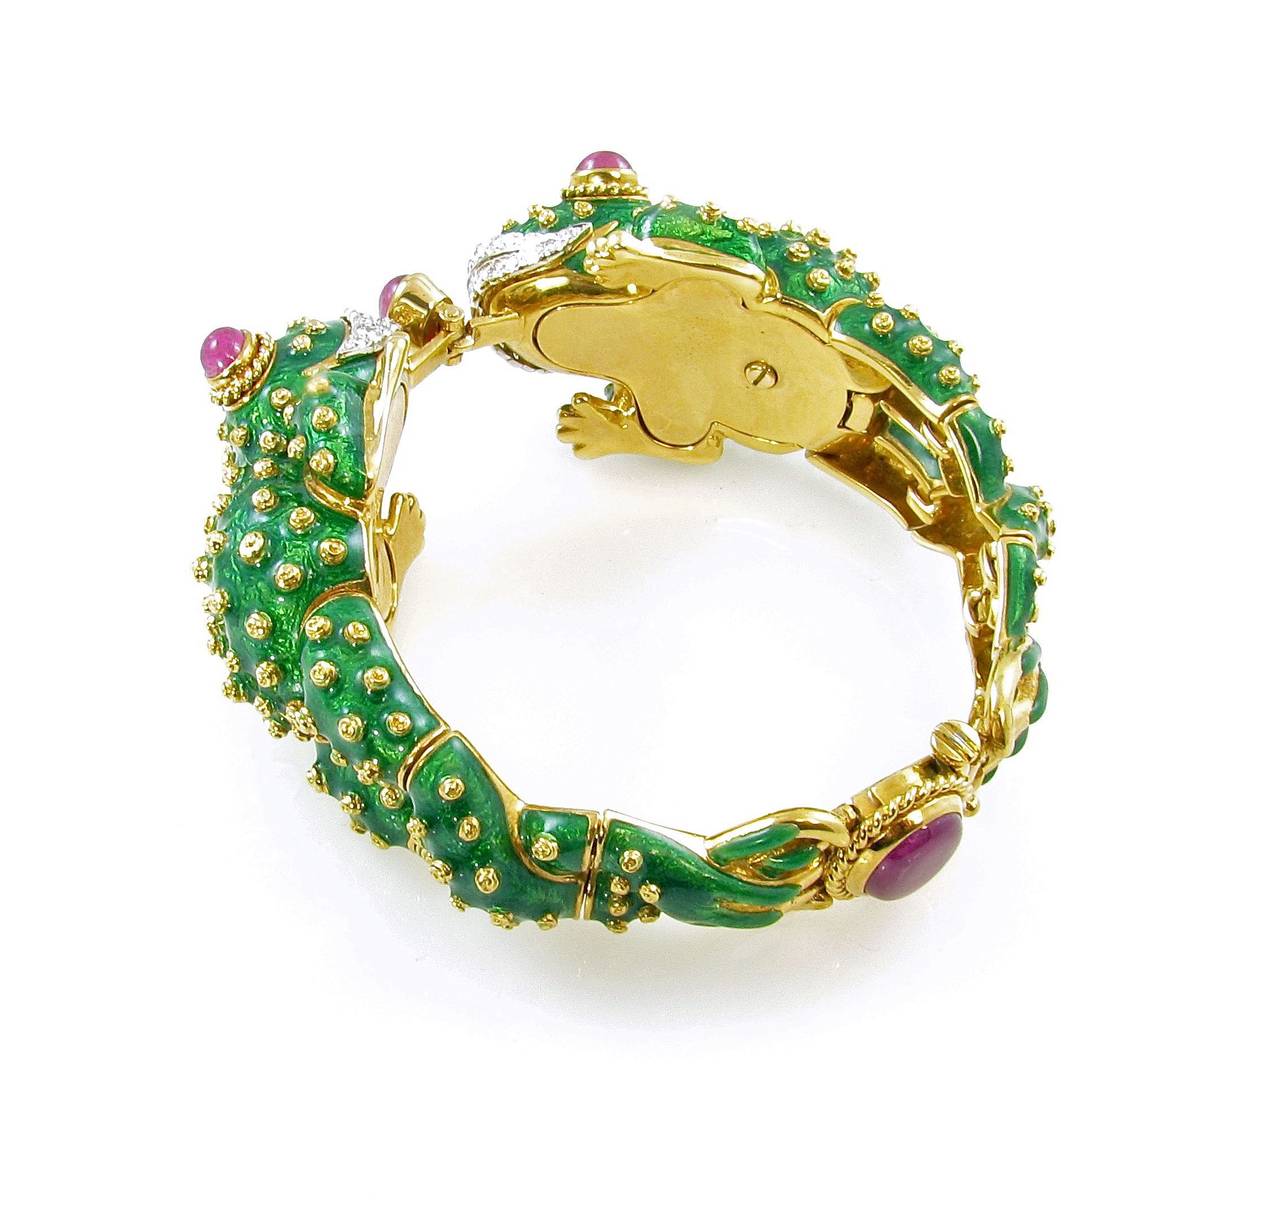 An 18 karat yellow gold, platinum, diamond, ruby and green enamel double frog bracelet, David Webb, Circa 1960s.  Signed Webb 18K Plat.  Designed as two confronting frogs applied with green enamel with gold accents, set with oval-shaped cabochon